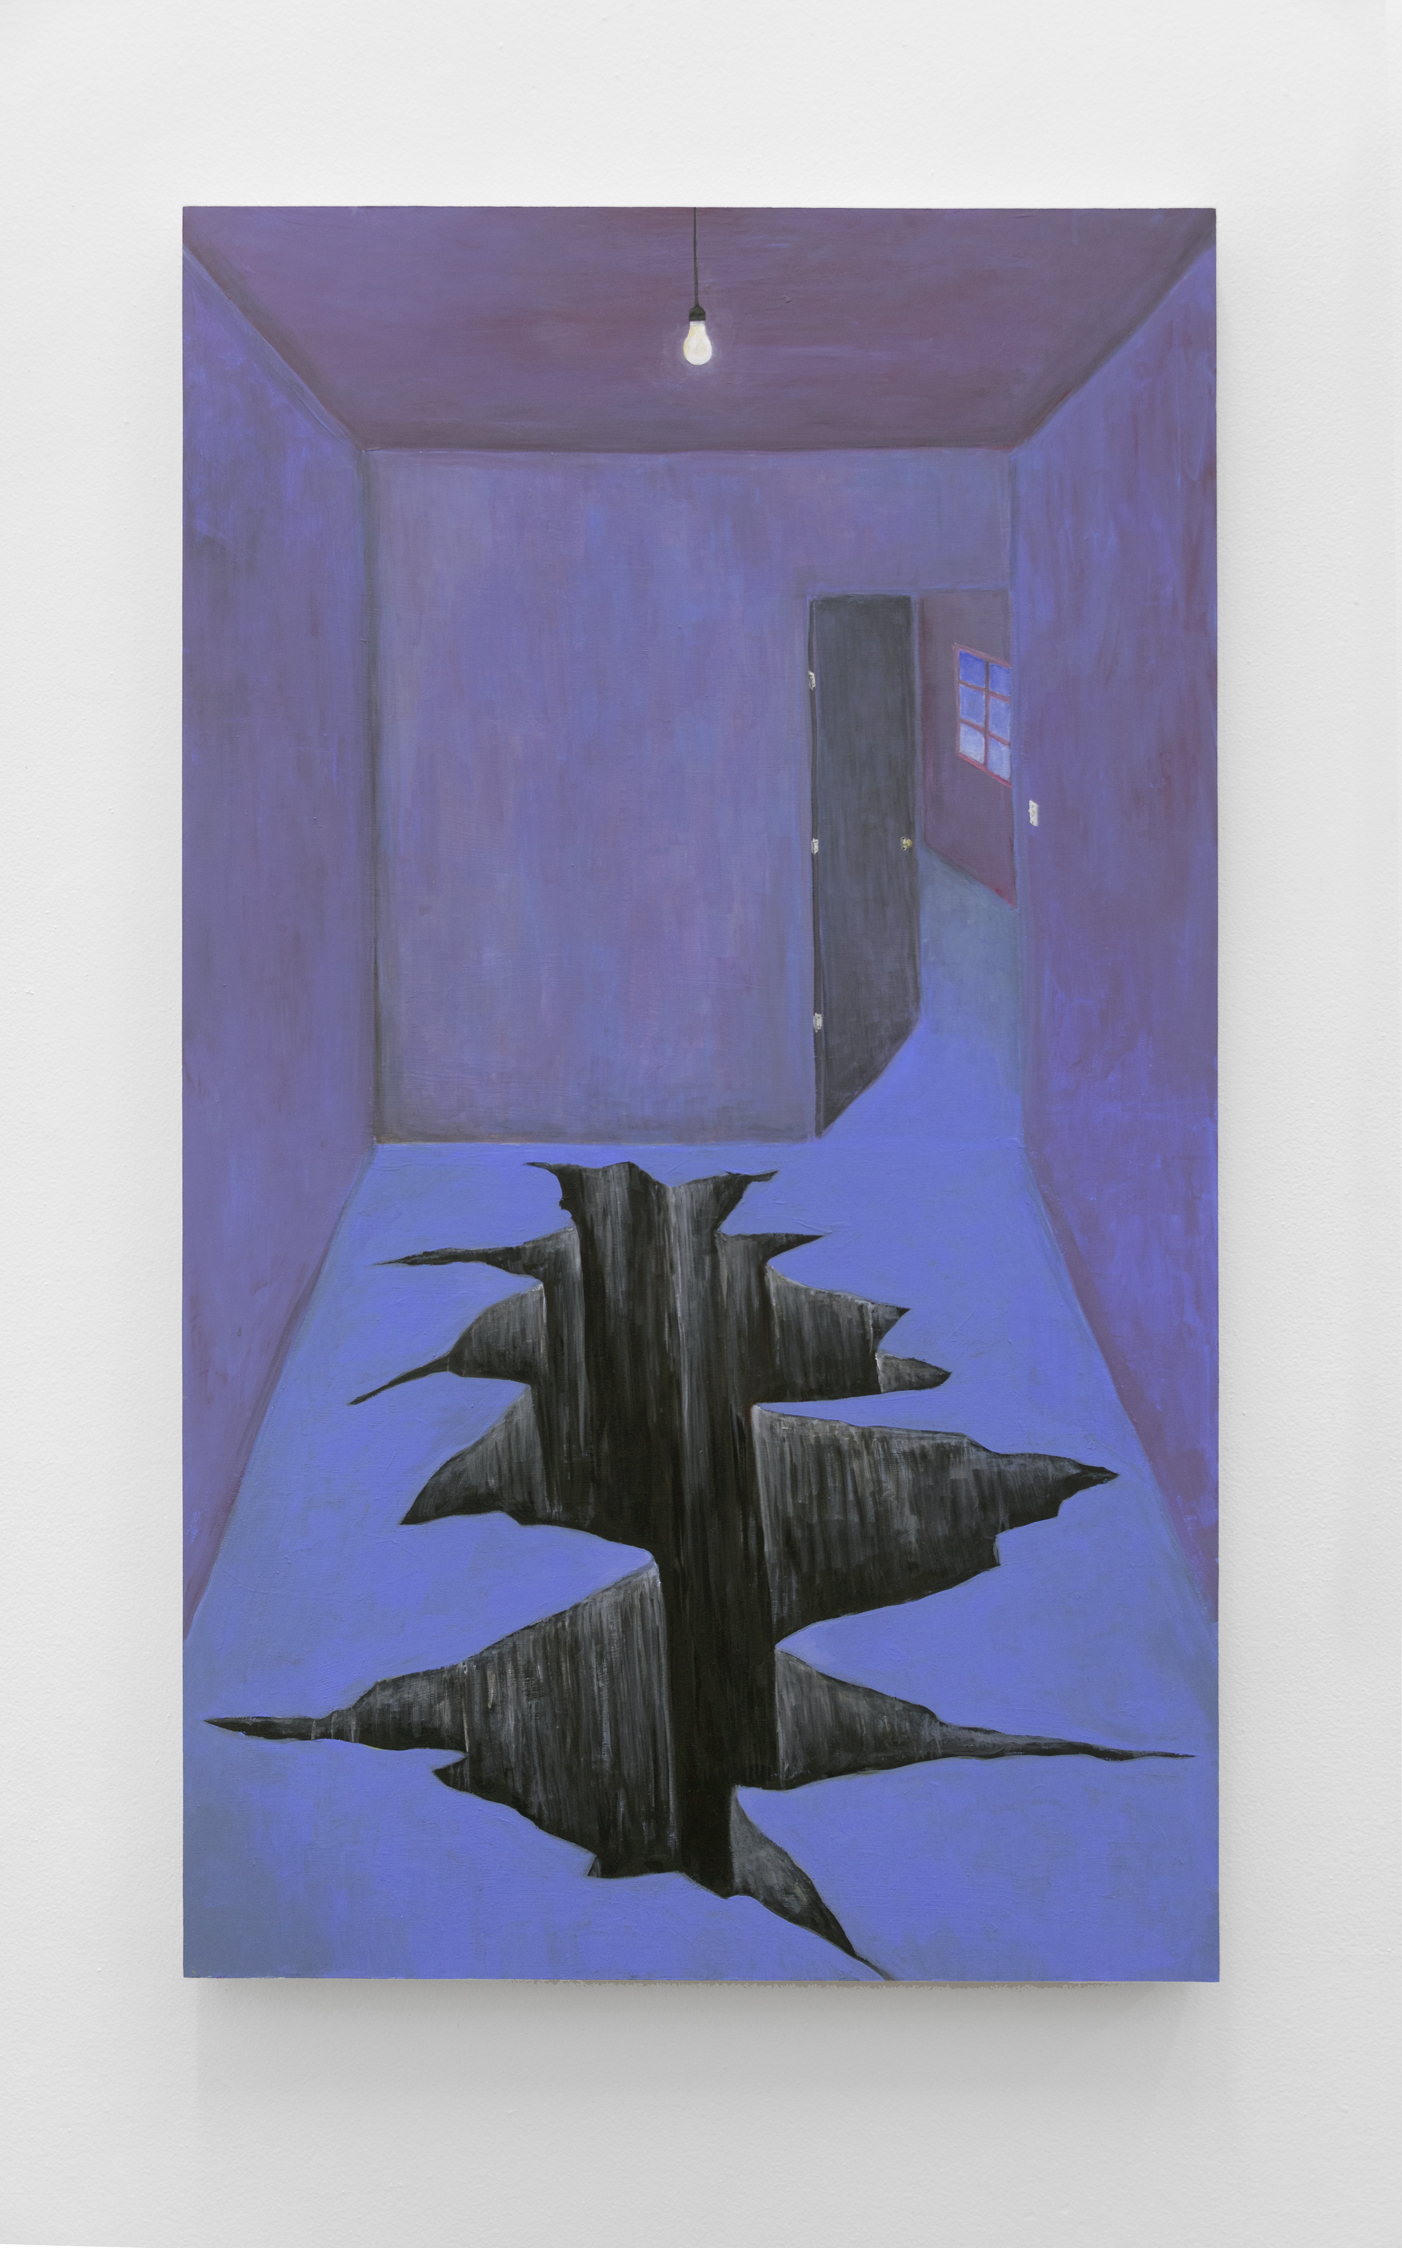   Chasm,  Acrylic and flashe on cradled birch panel 48 x 28 in, 2019 